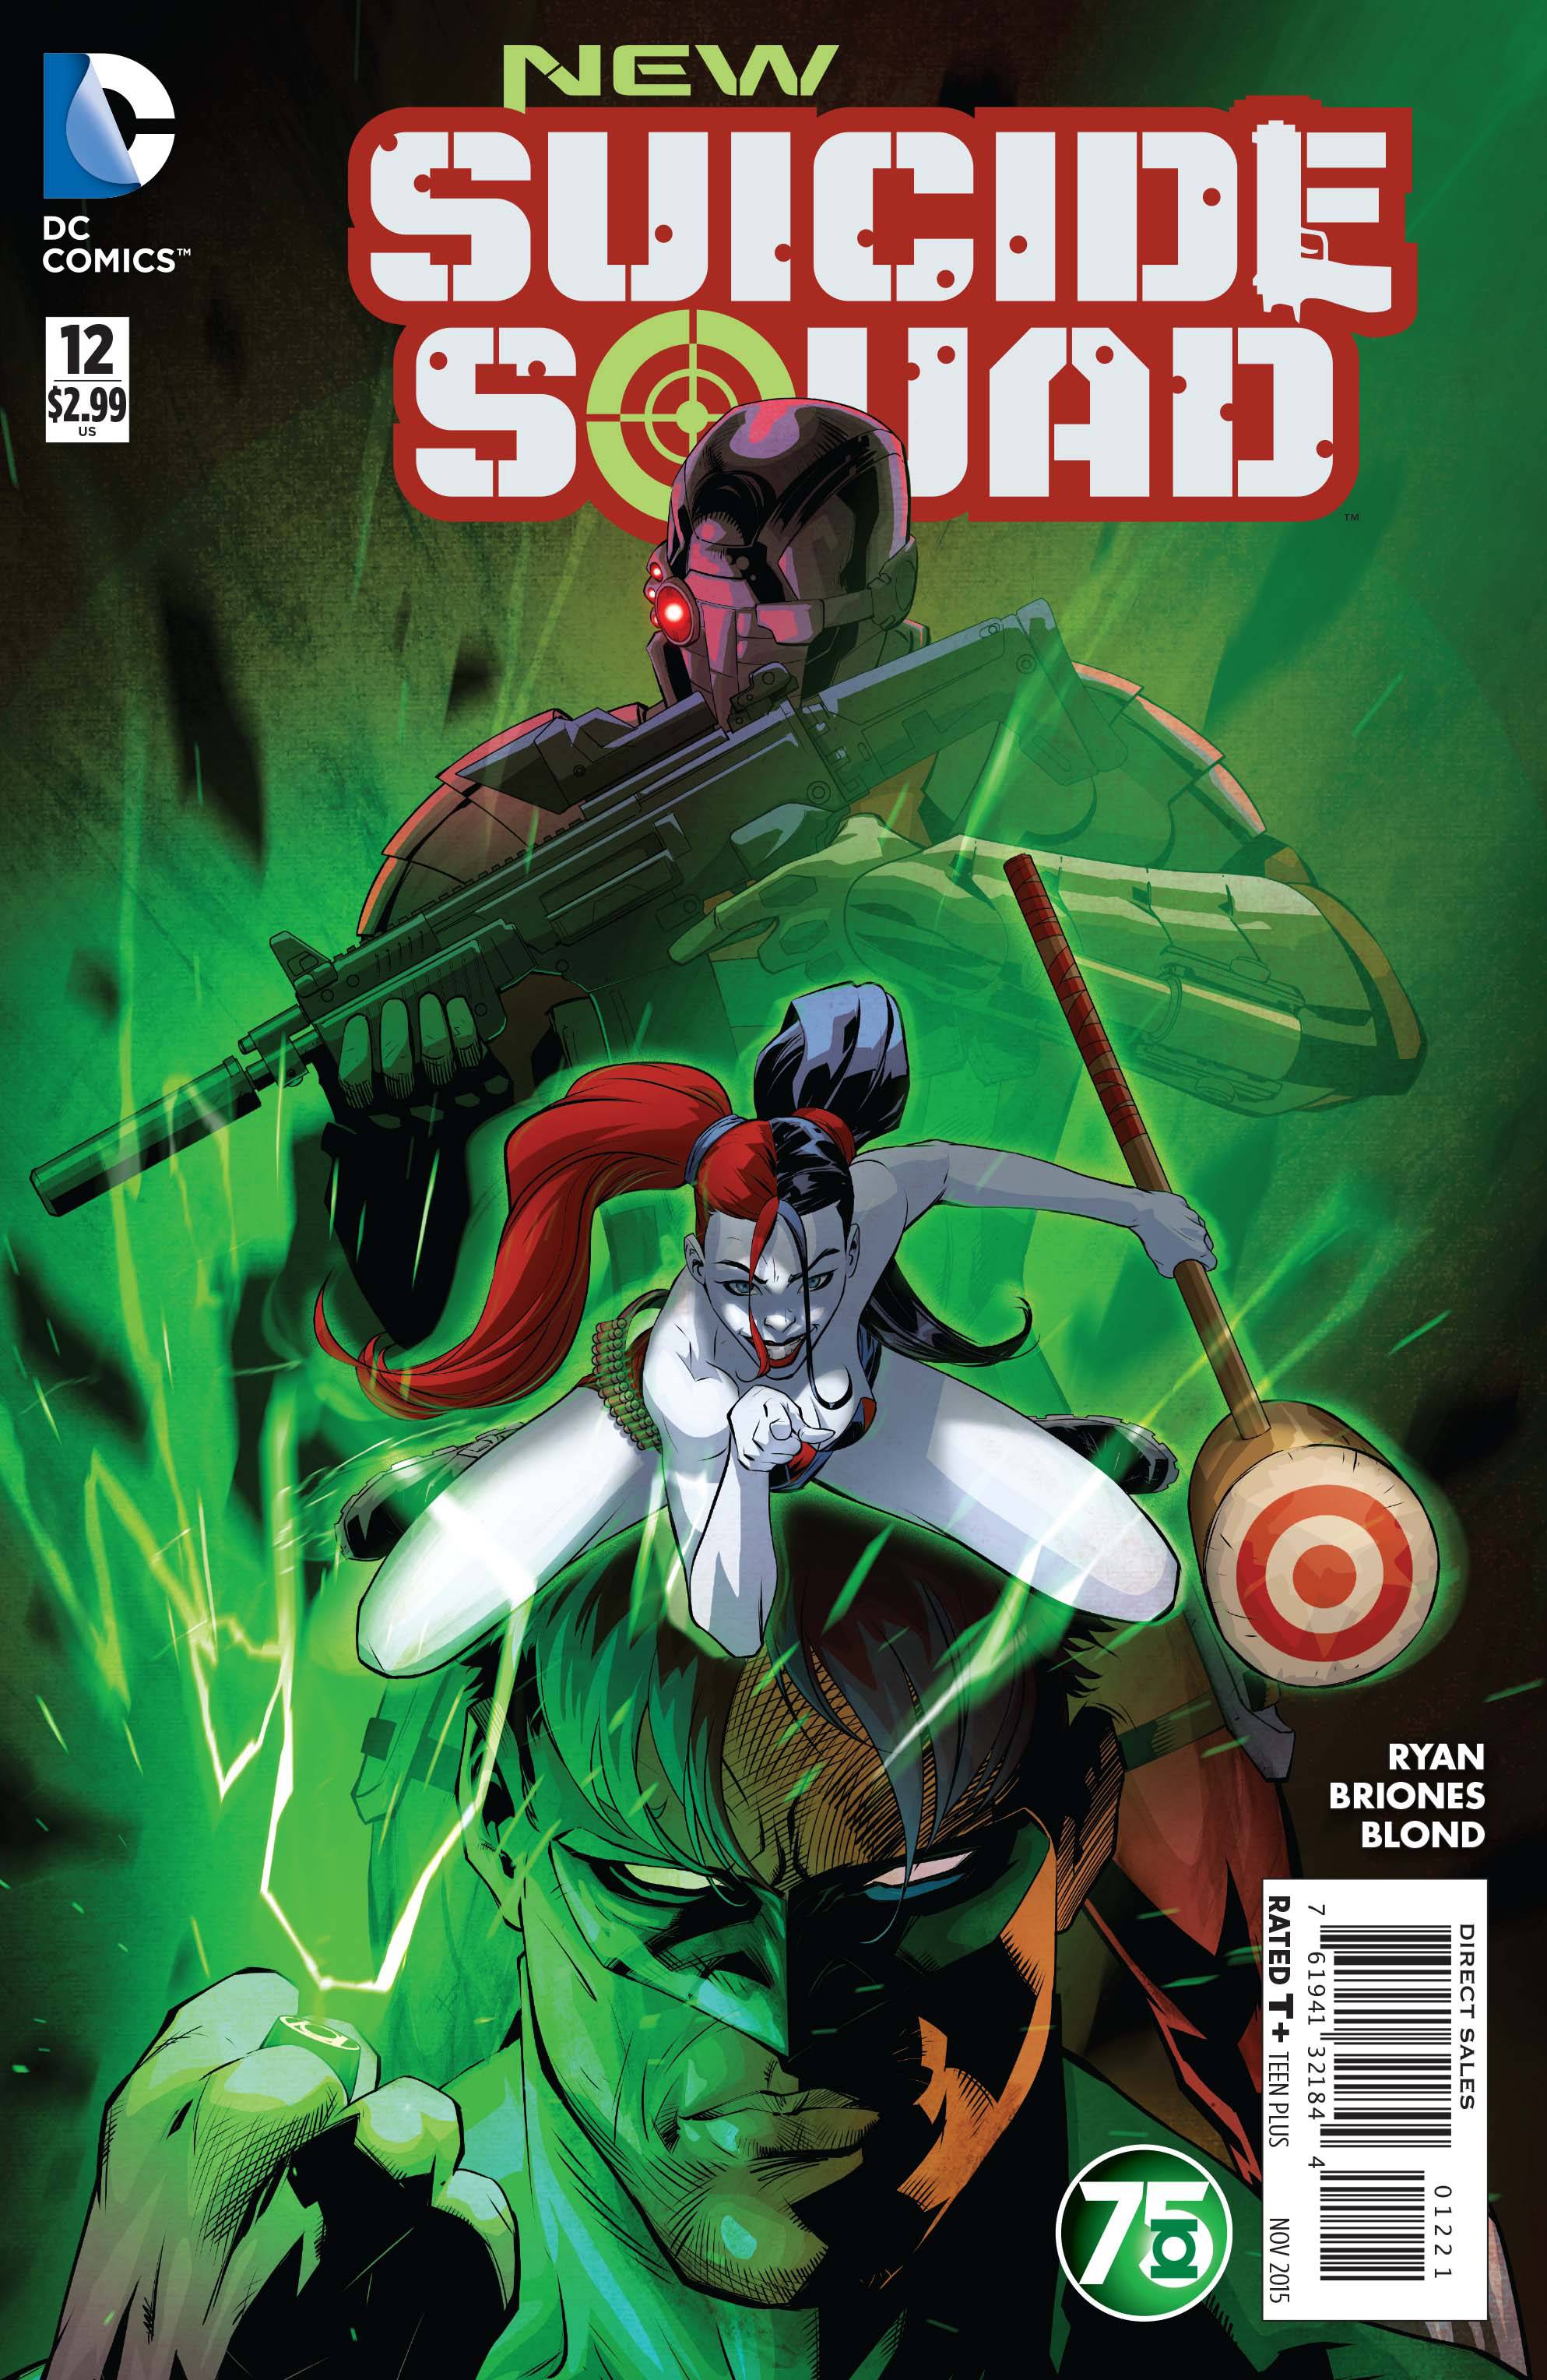 New Suicide Squad #12 Green Lantern 75 Variant Edition (2014)